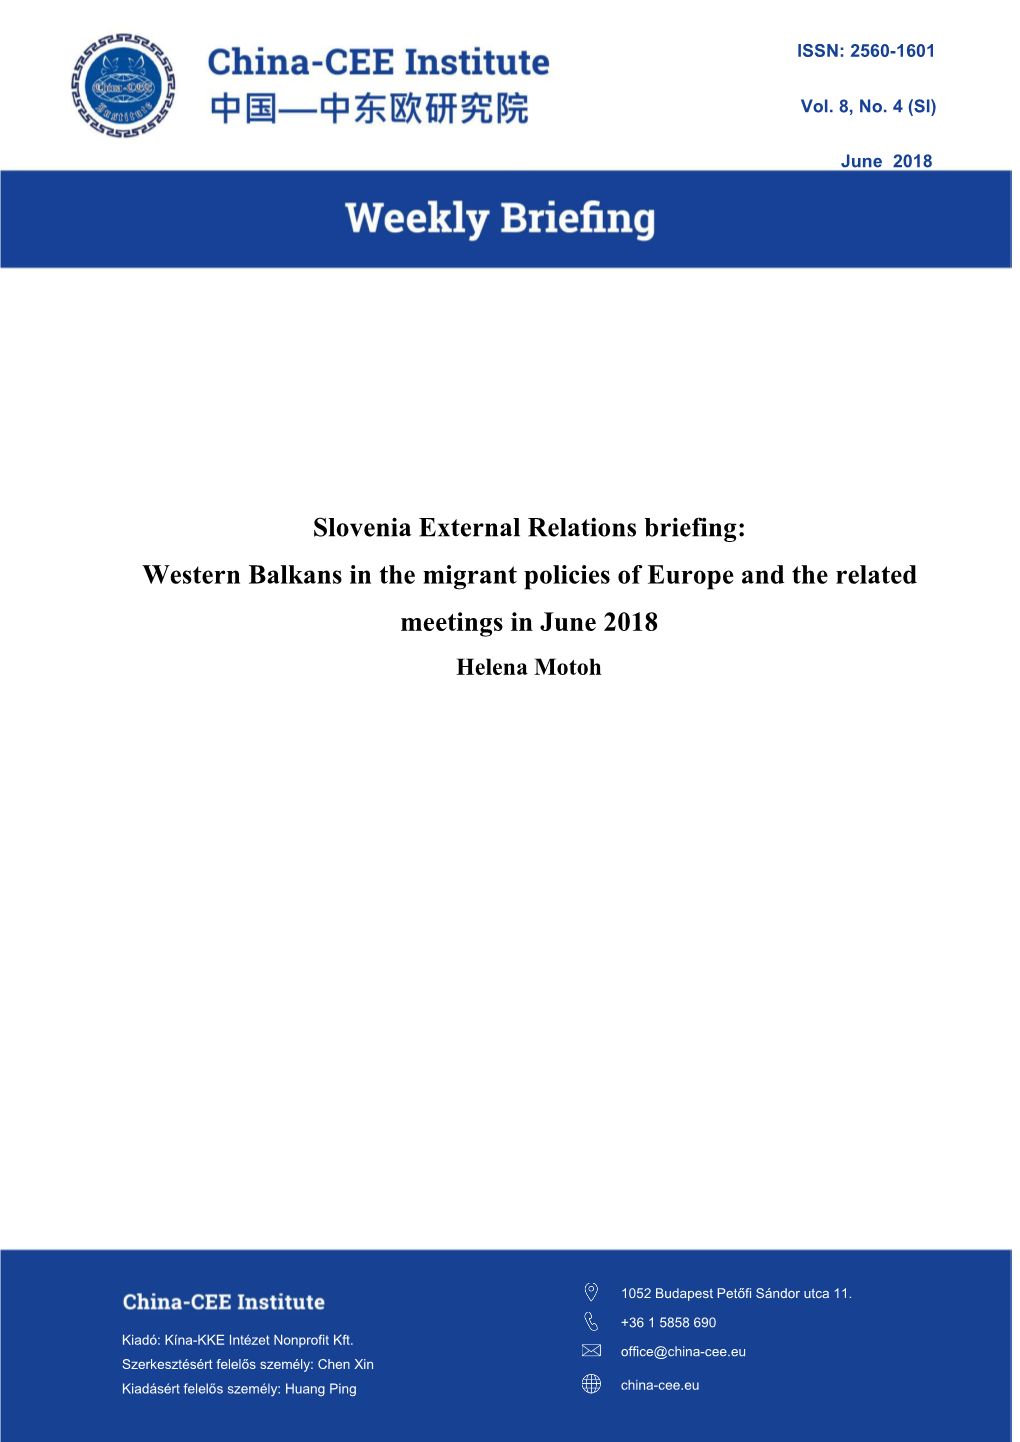 Slovenia External Relations Briefing: Western Balkans in the Migrant Policies of Europe and the Related Meetings in June 2018 Helena Motoh